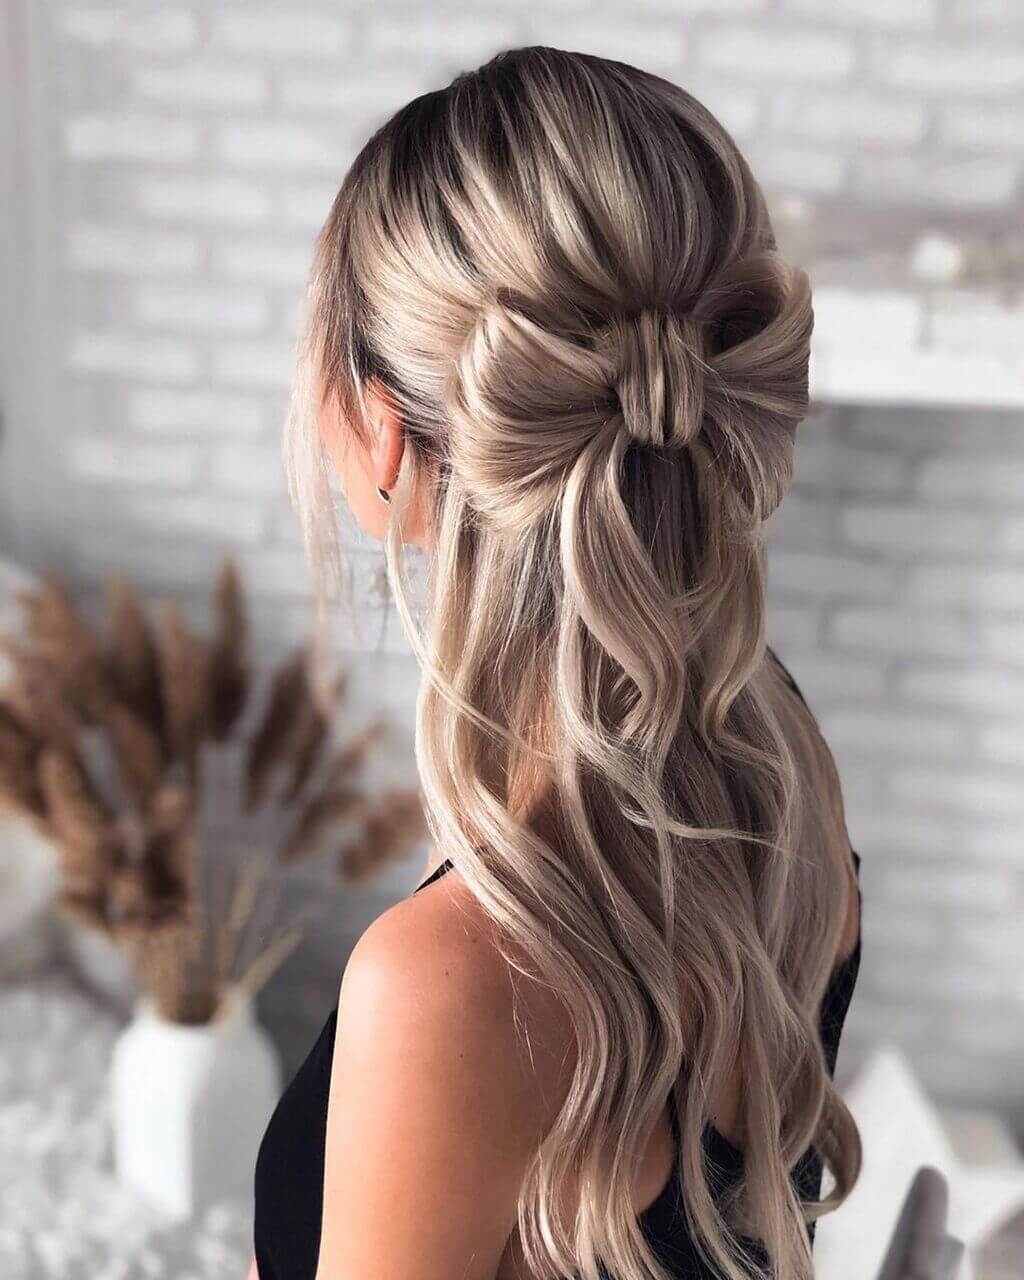 7 Bridal Half Up Half Down Hairstyle Ideas to Wear on Your Wedding Day